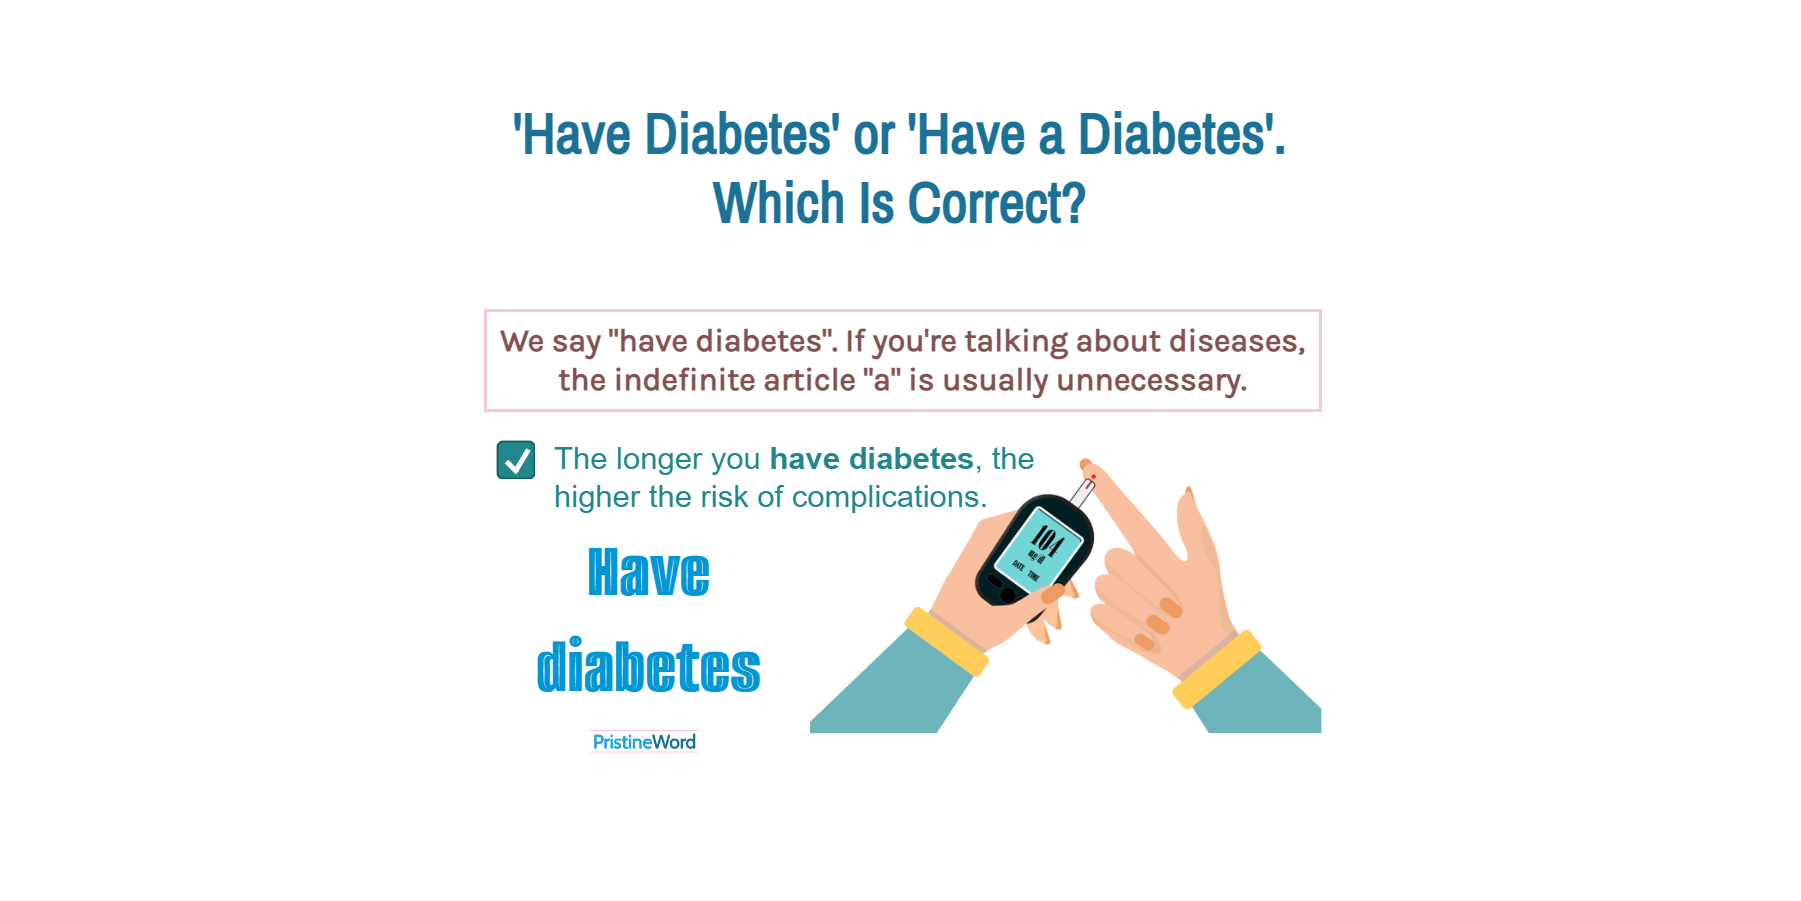 Have Diabetes or Have a Diabetes. Which Is Correct?